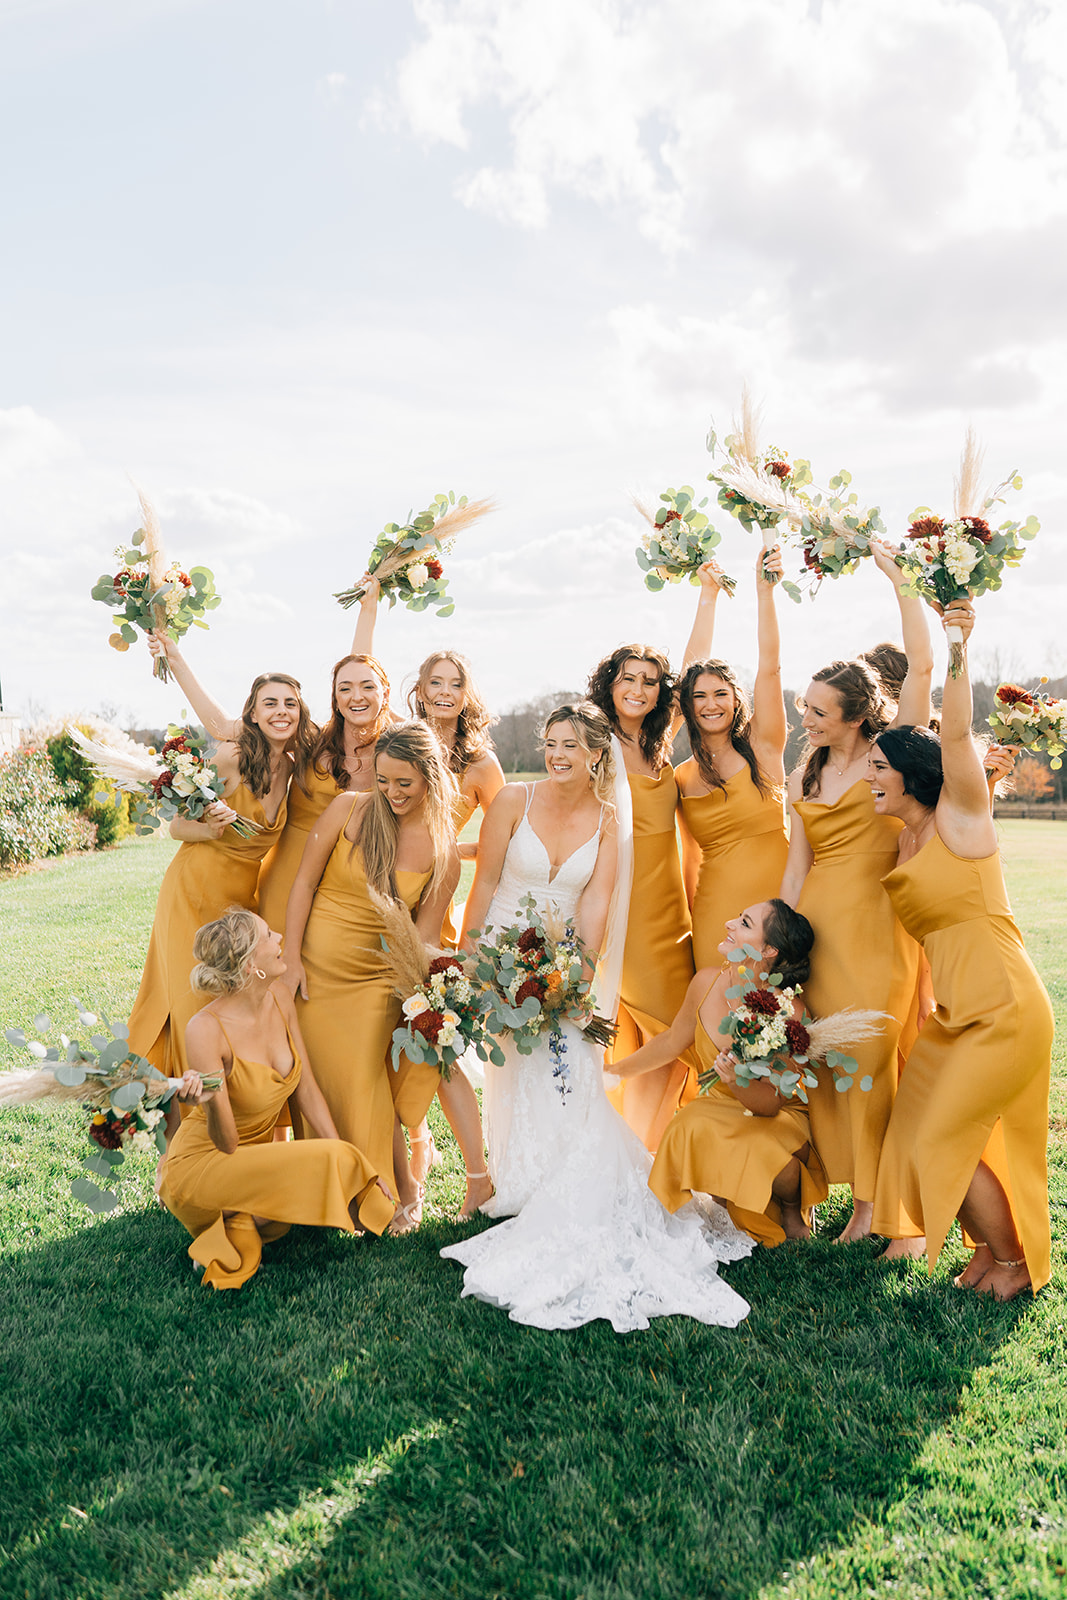 A bride and her bridesmaids cheer excitedly